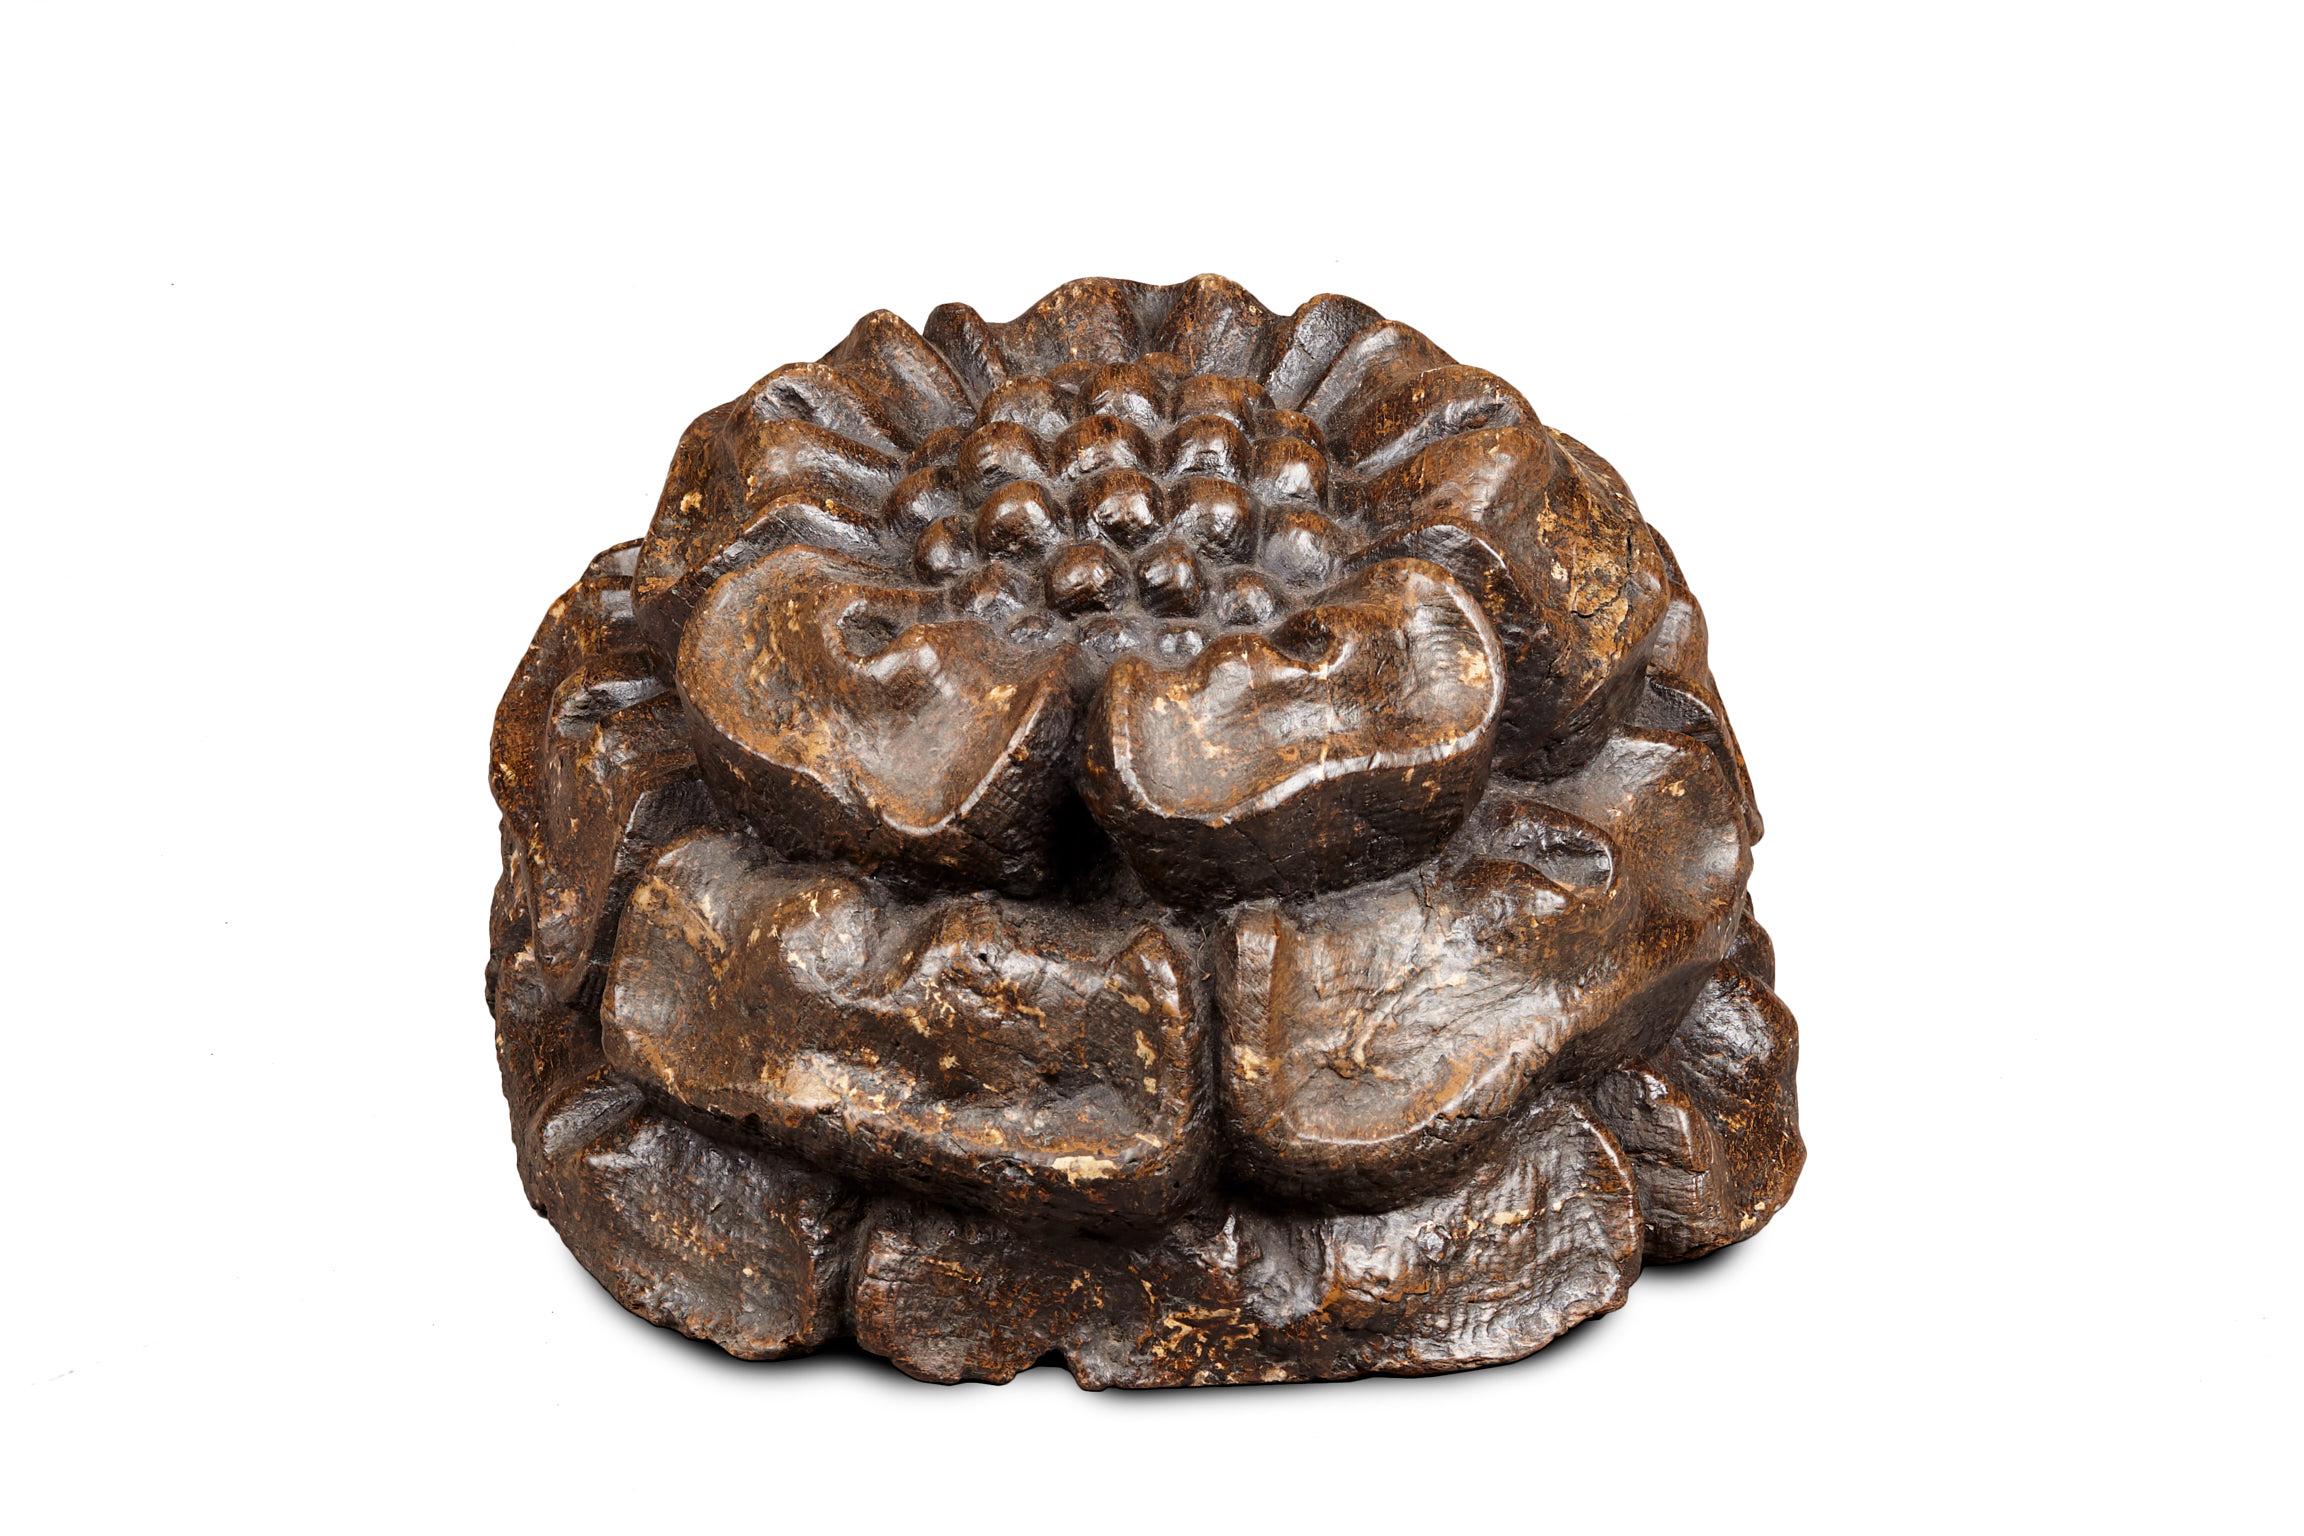 Large medieval Henry VII/Henry VIII Tudor oak ceiling boss, English, circa 1485-1530.

Boldly carved from the solid in three distinctive tiers as a Tudor rose with five petal seeded centre. With traces of original polychrome and gilt painted